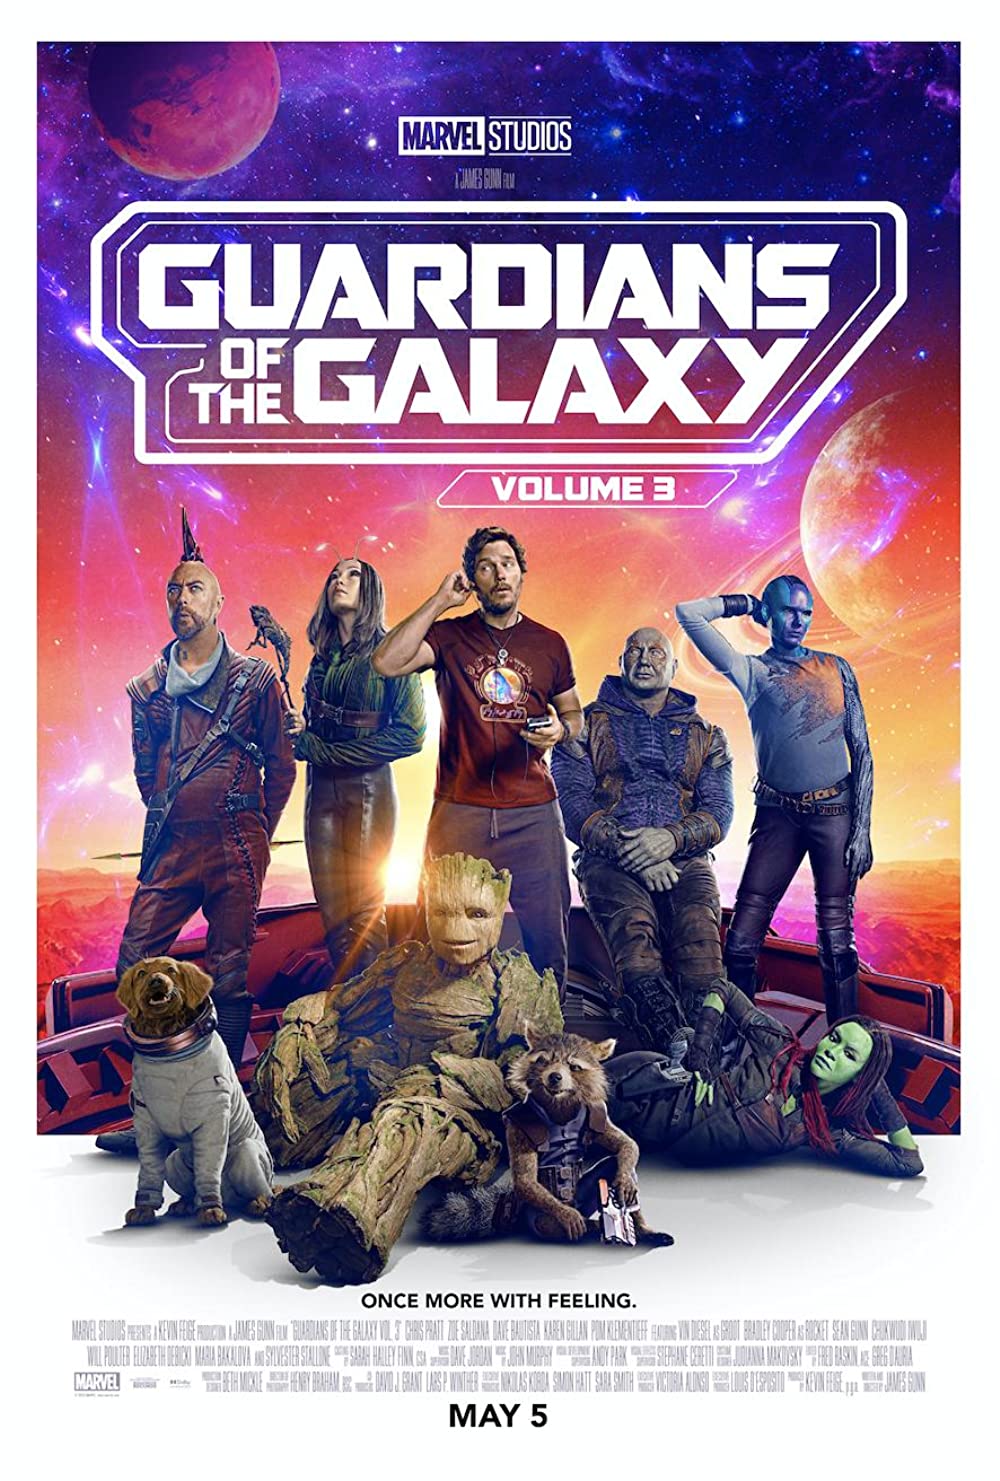 Guardians of the Glaxy